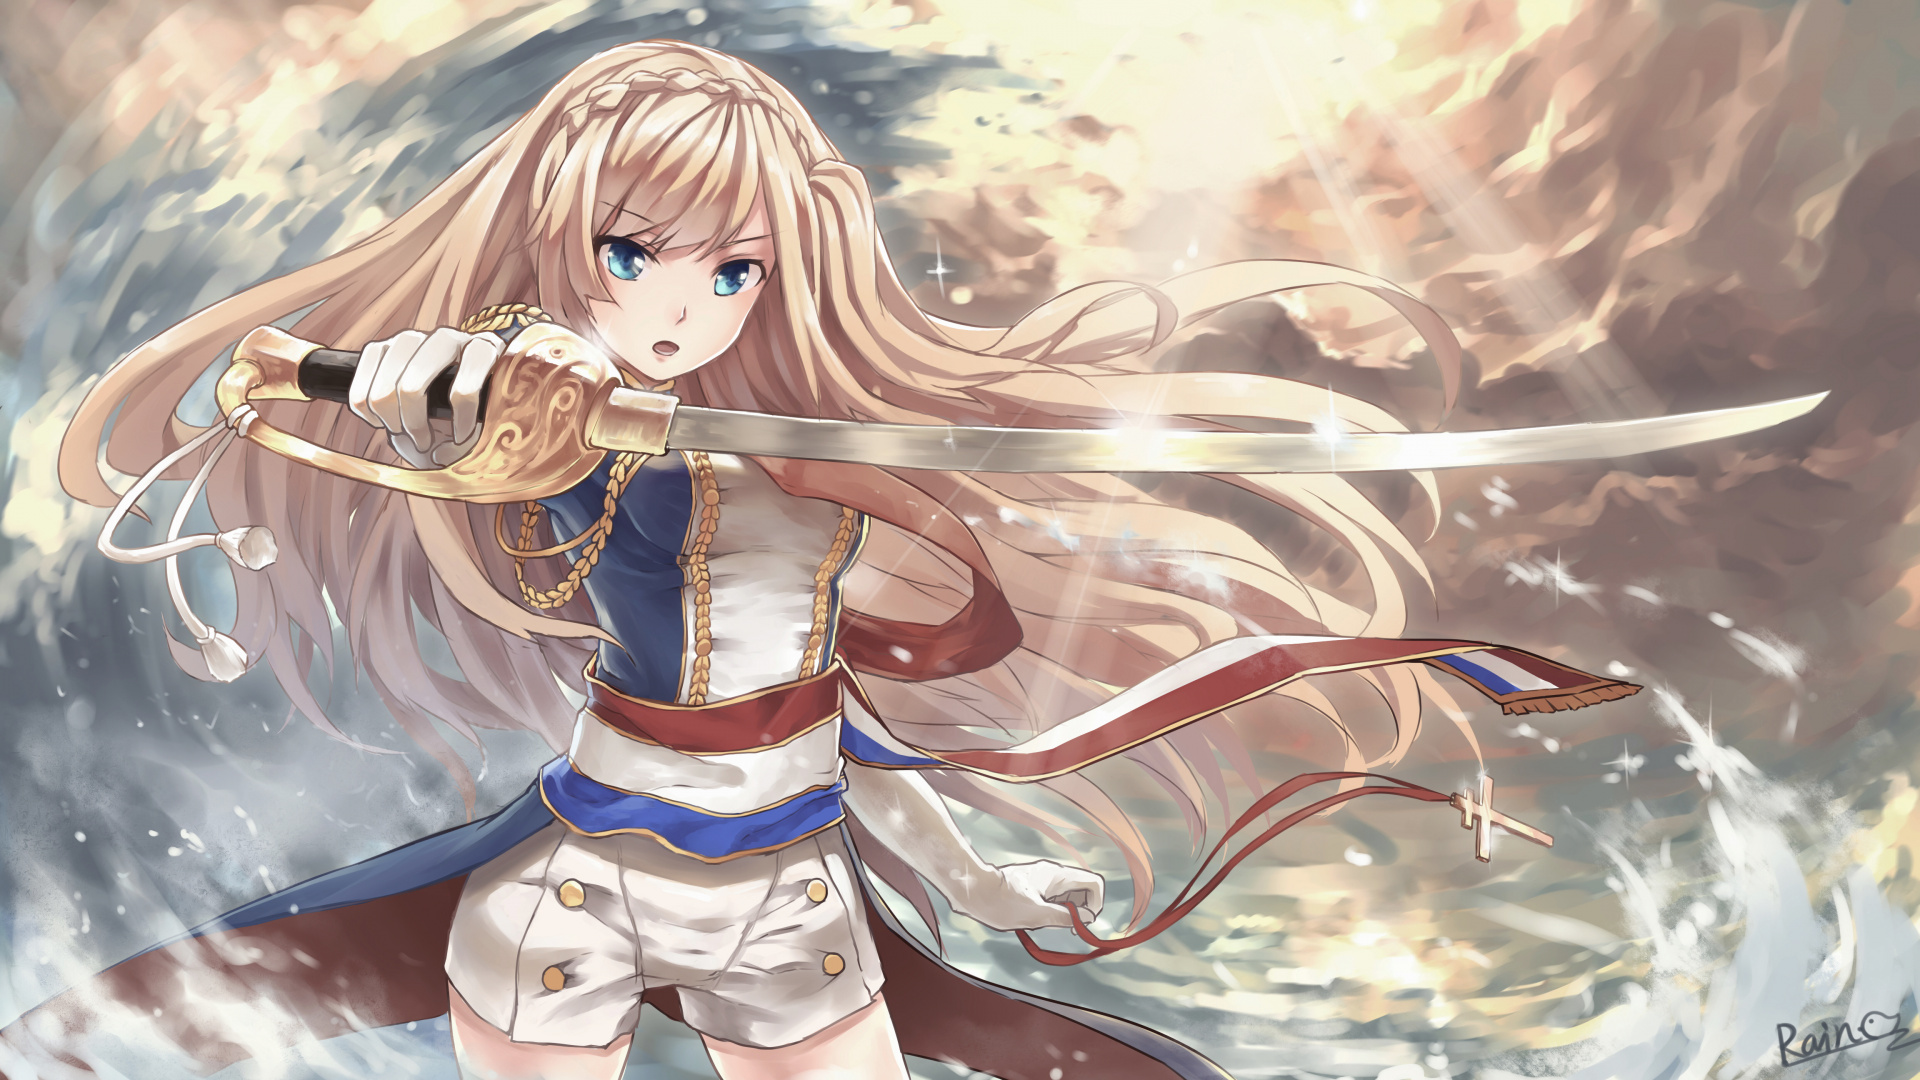 Personnage D'anime Fille Aux Cheveux Blonds. Wallpaper in 1920x1080 Resolution